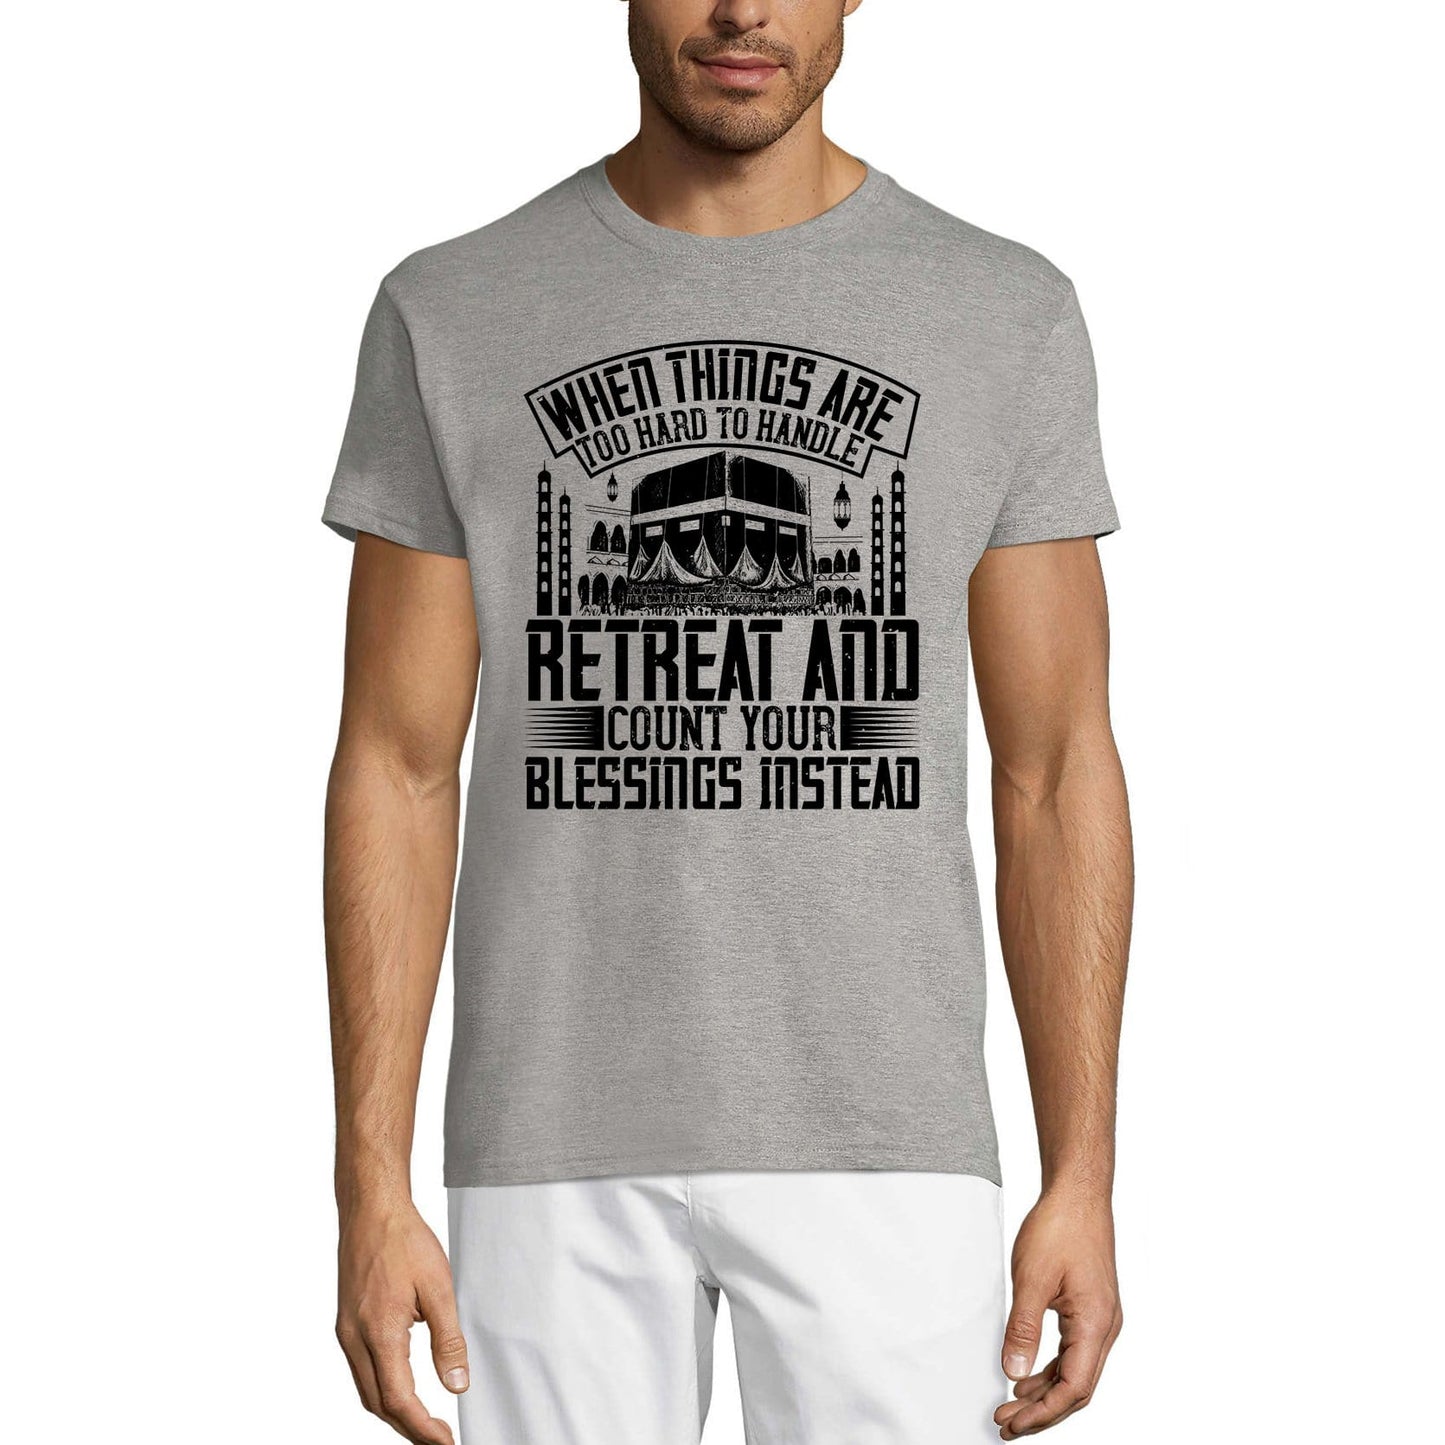 ULTRABASIC Men's T-Shirt When Things are Too Hard To Handle Retreat and Count Your Blessings Instead